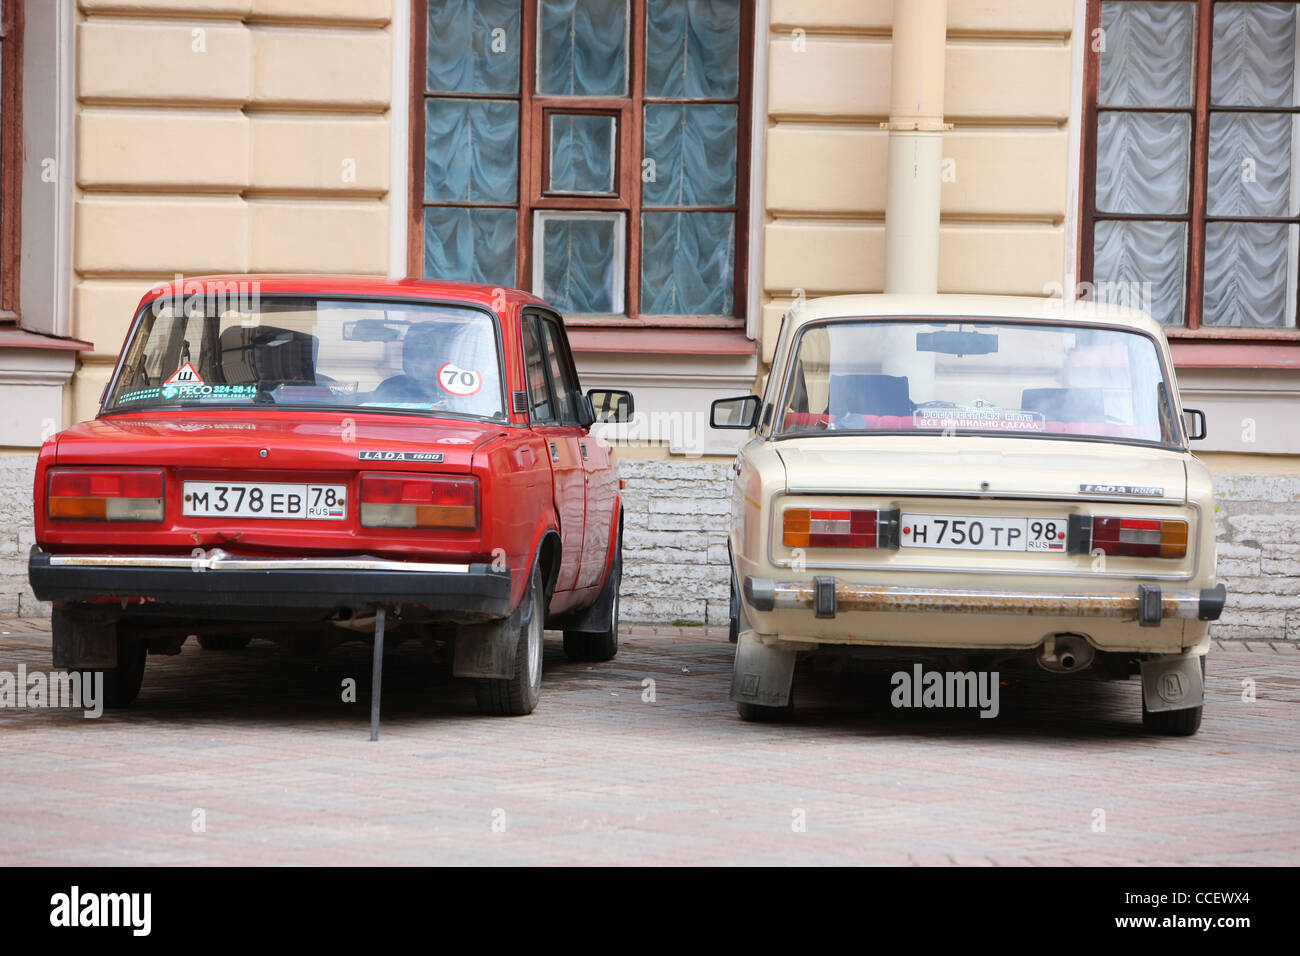 Two Lada cars, the streets of St. Petersburg, Russia Stock Photo